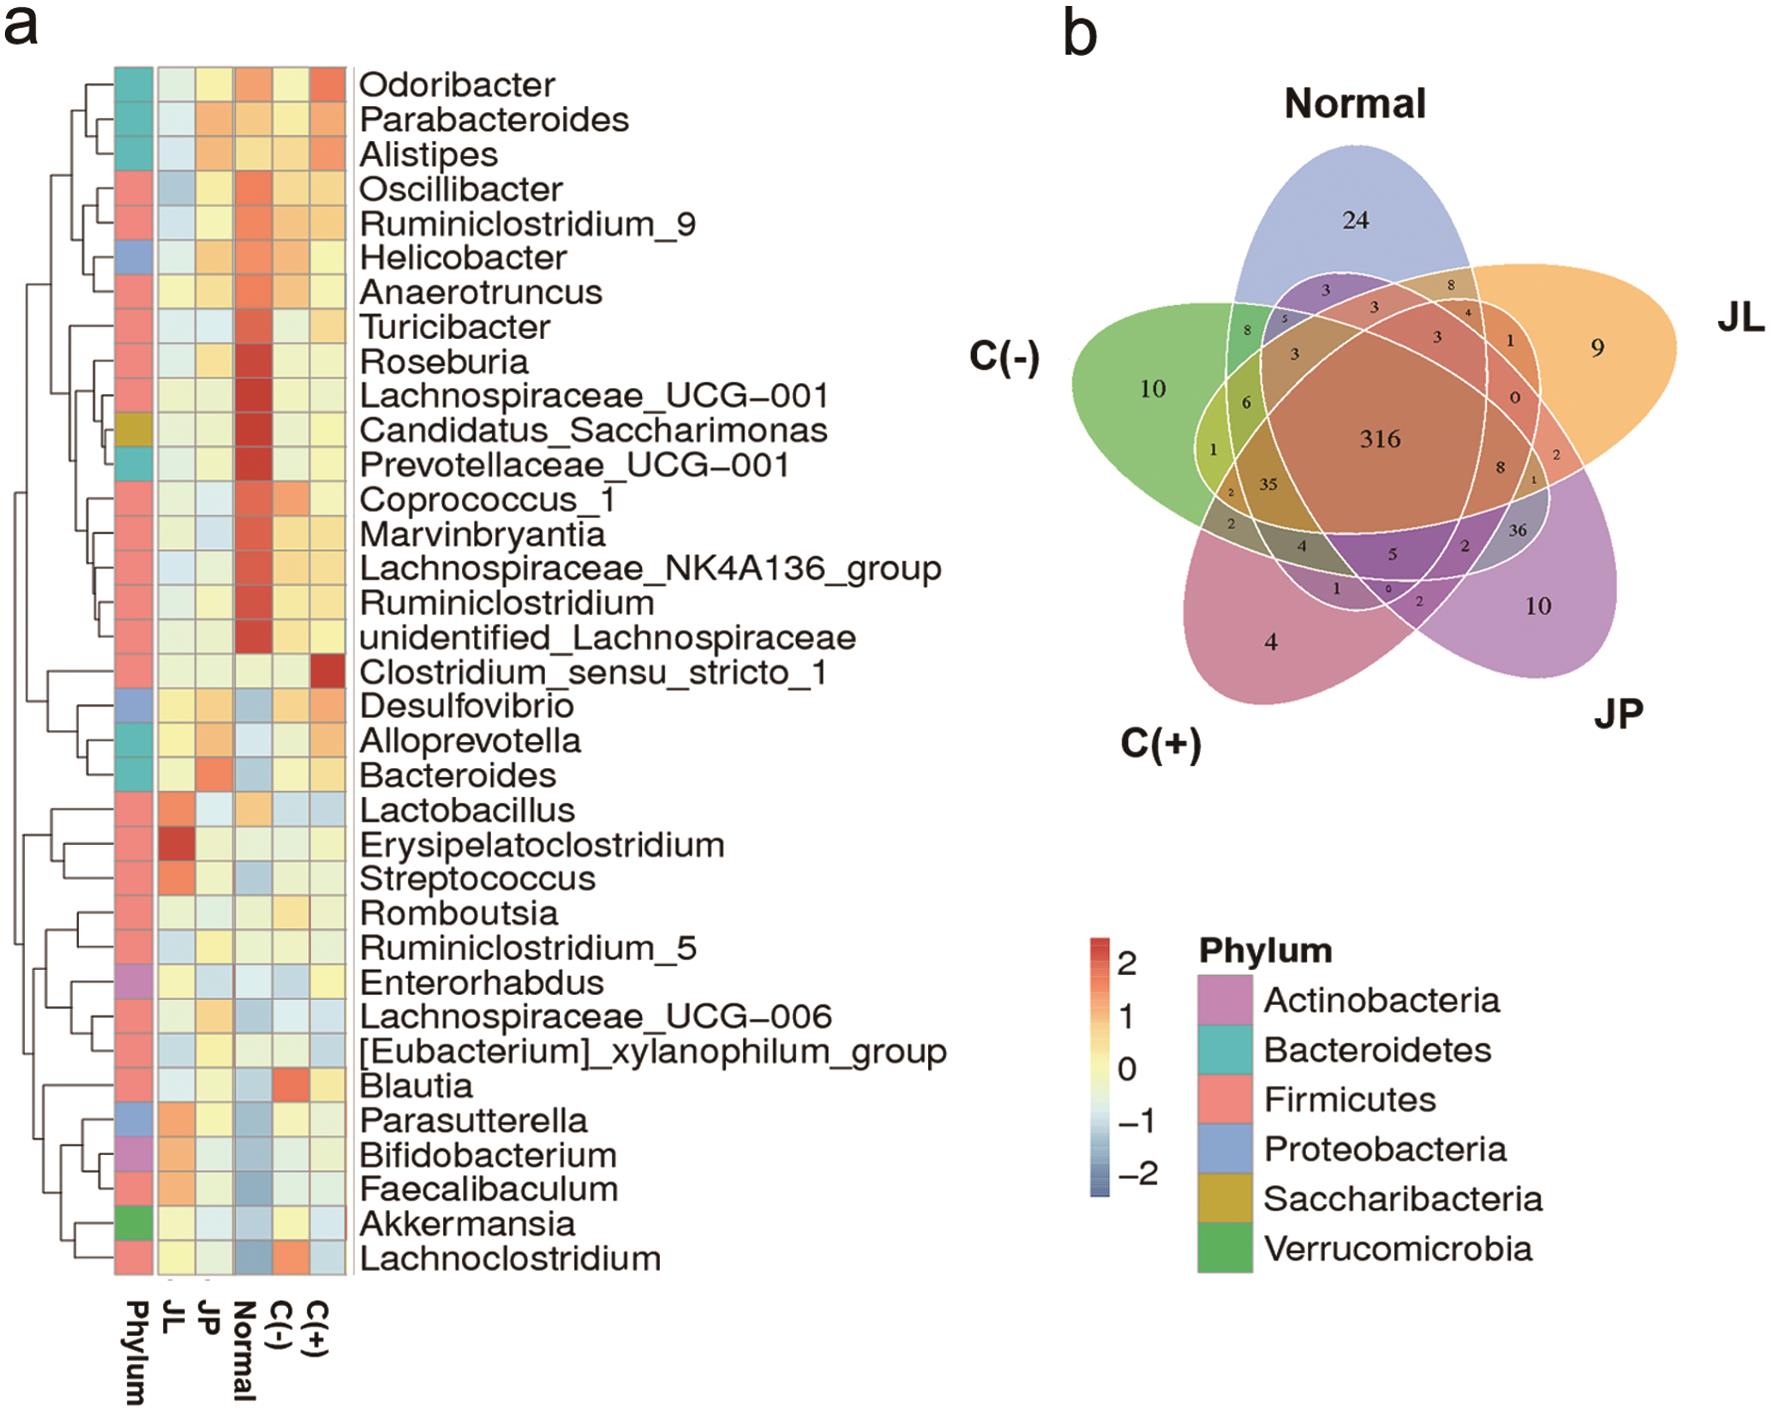 Metagenomic analysis on the gut microbiome of high-fat diet mice fed with various treatments for a duration of two months.